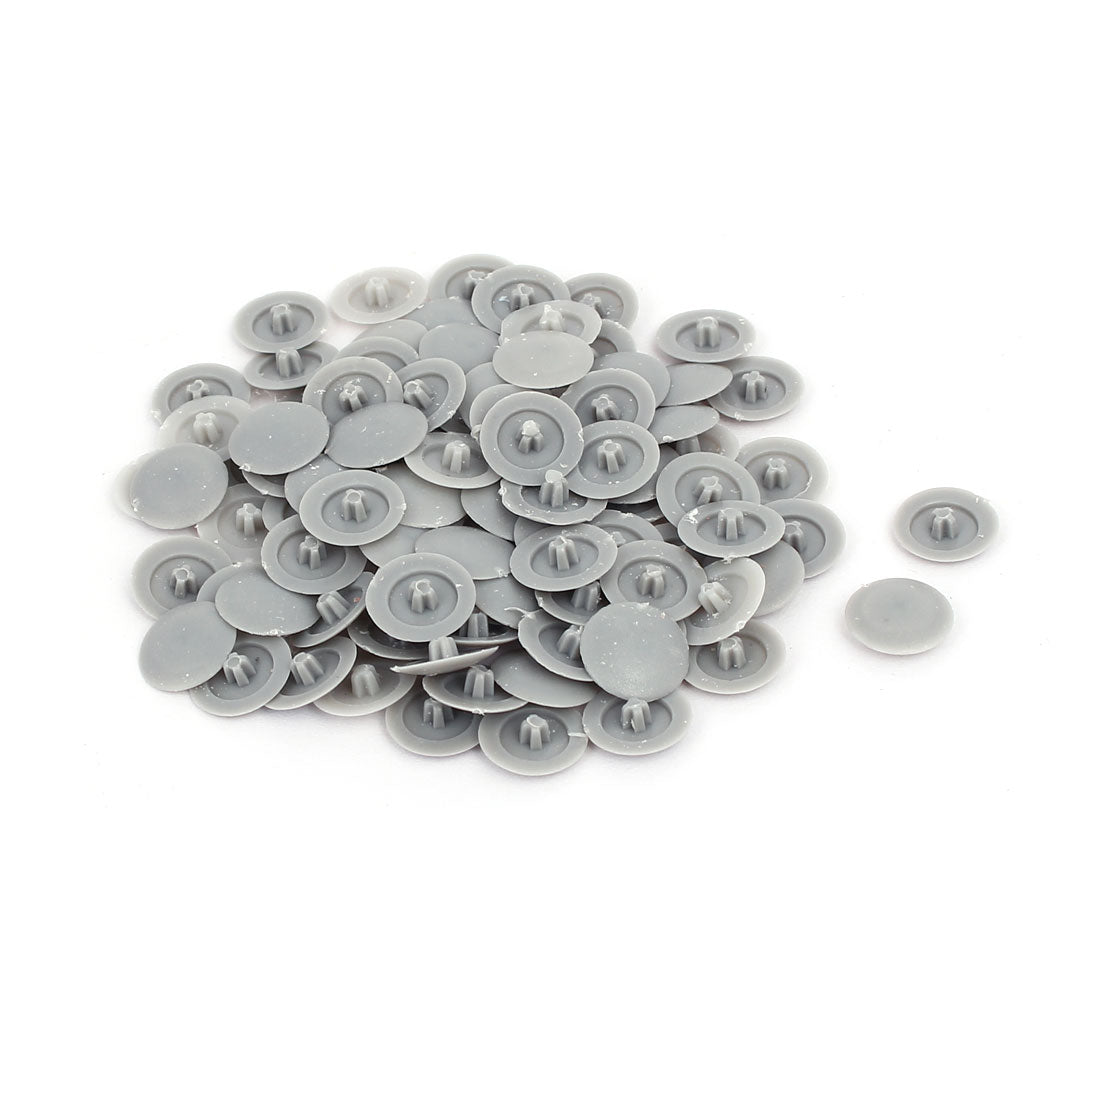 uxcell Uxcell 12mm Dia Plastic Phillips Screw Cap Hole Plugs Dust Proof Covers Gray 100pcs